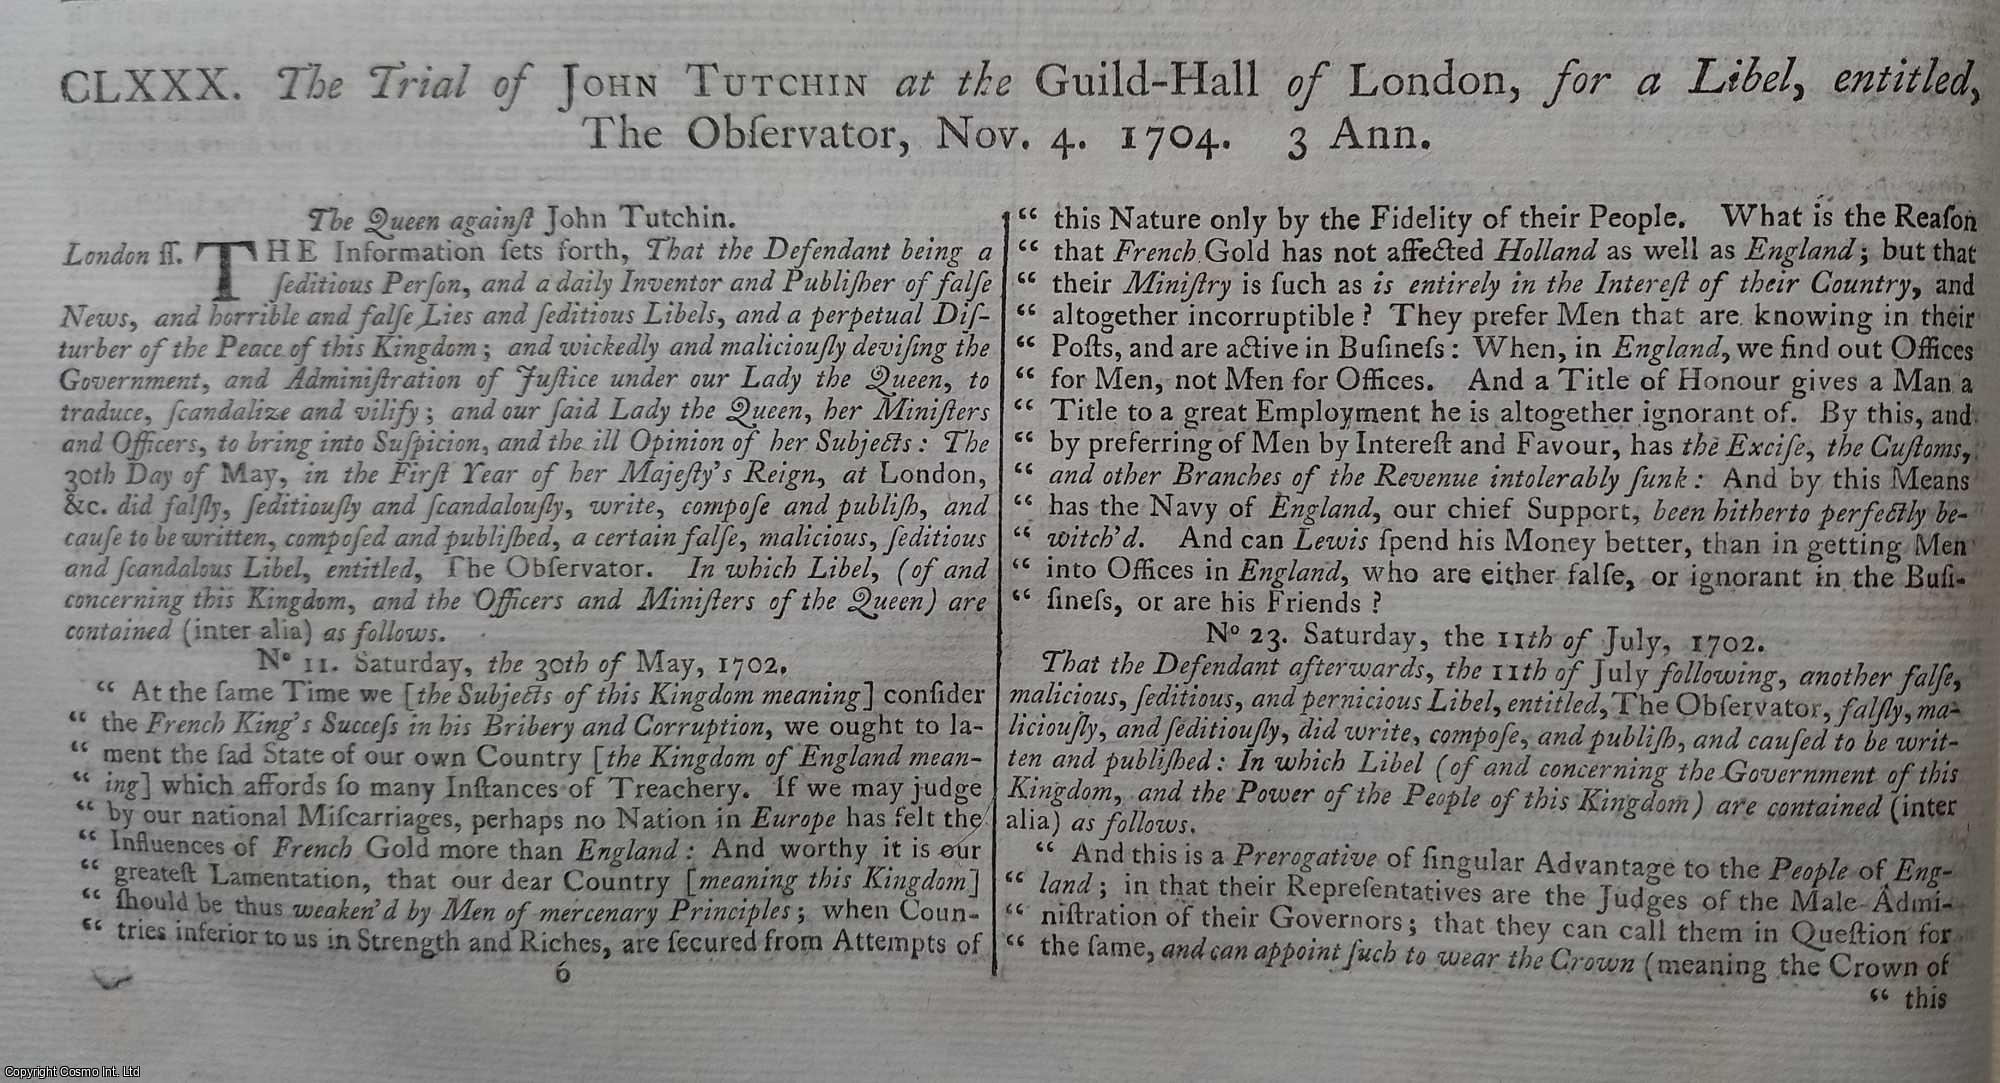 [Trial] - The Trial of John Tutchin, on an Information for a Libel, called The Observator, at Guildhall, 4th Nov, 1704. An original article from the Collected State Trials.